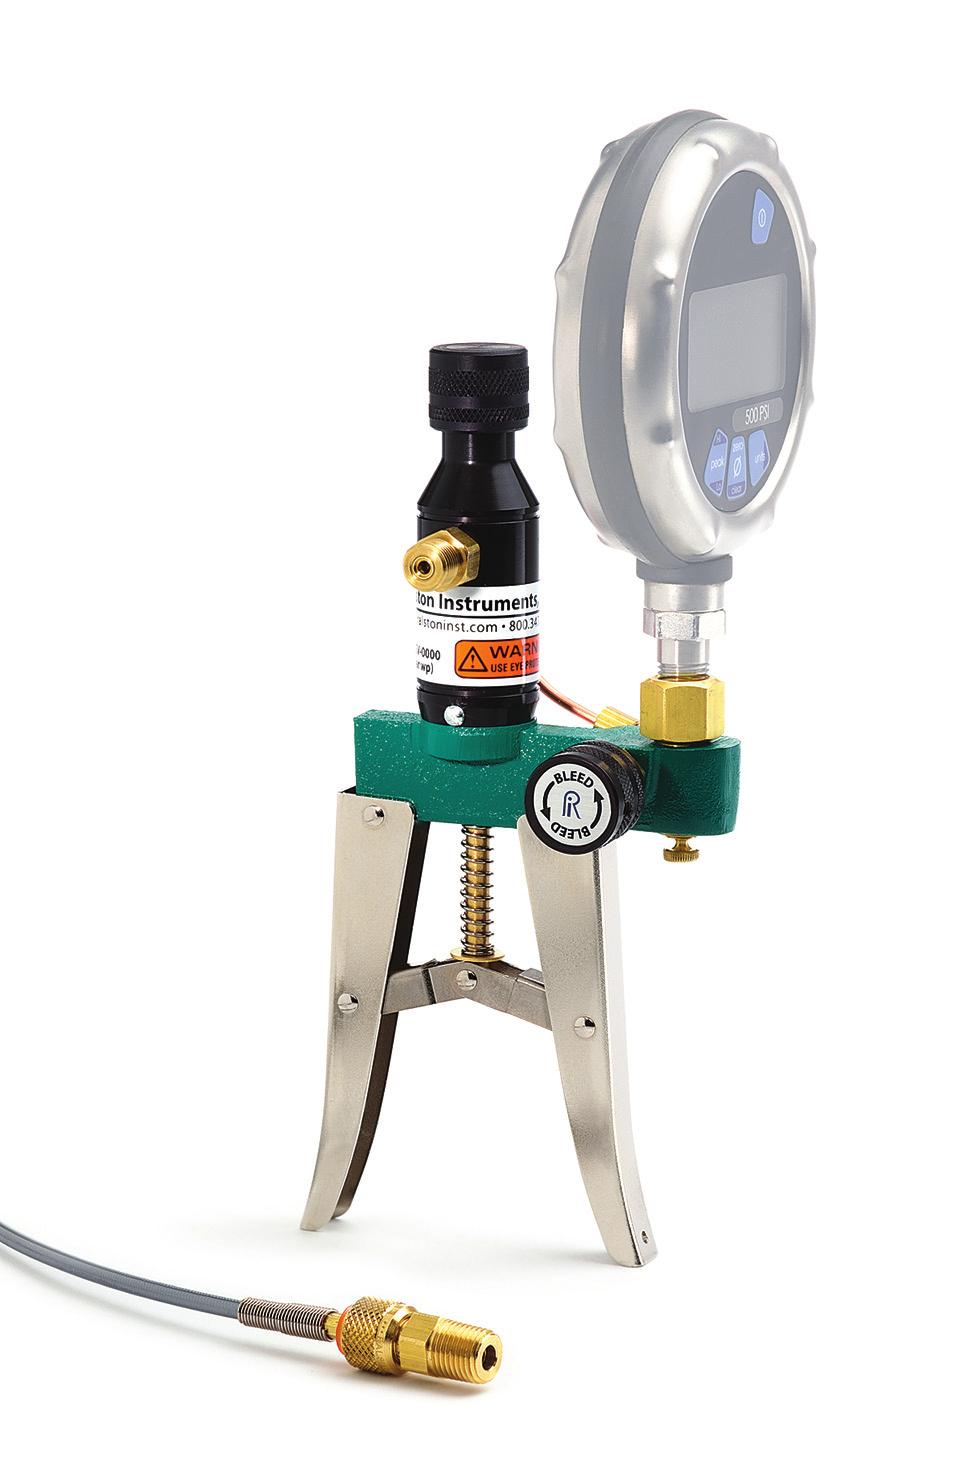 Pneumatic Hand Pumps with Gauge Connection (scissor handle) APGV (300 psi / 20 bar) Quick and efficient pneumatic field testing of pressure transmitters, gauges or switches is aided by an integral